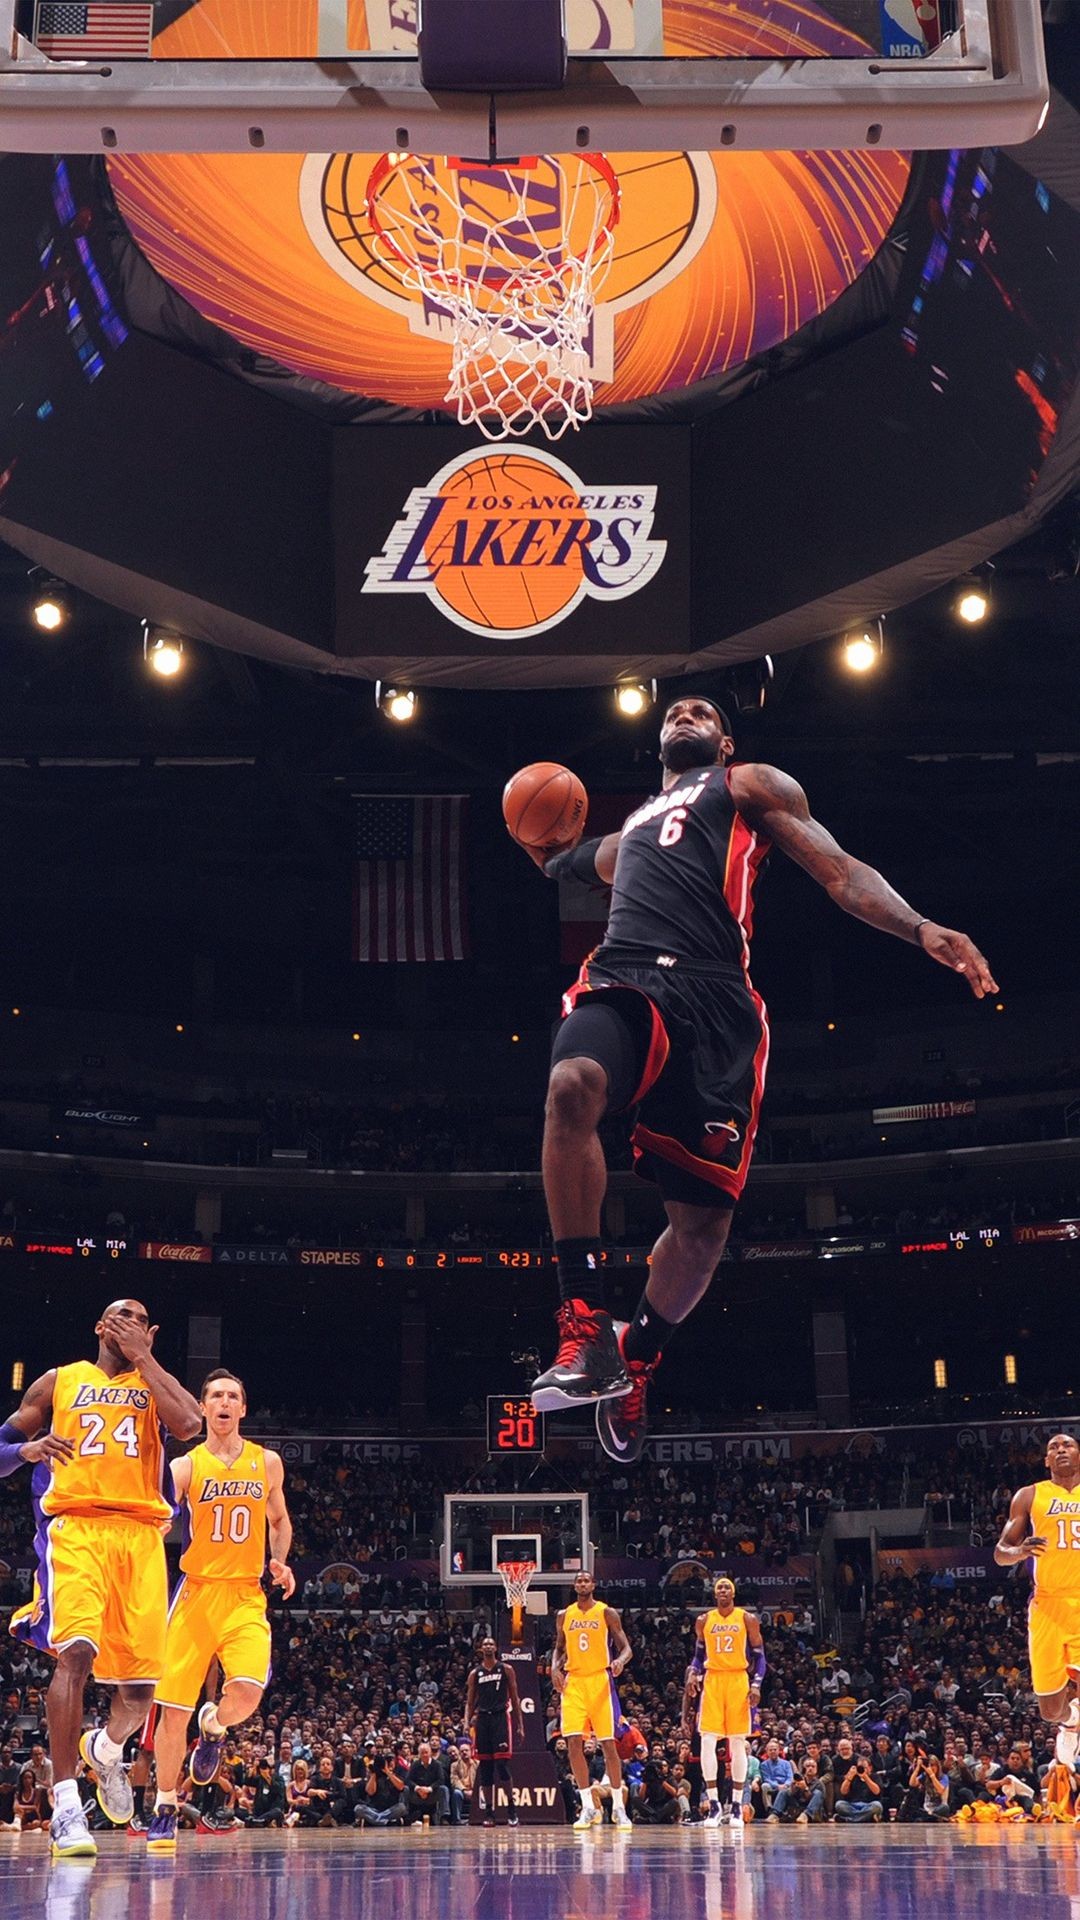 3000x2051 Lebron James Dunk Wallpapers For Iphone Dodskypict Quot Gt 1080x1920